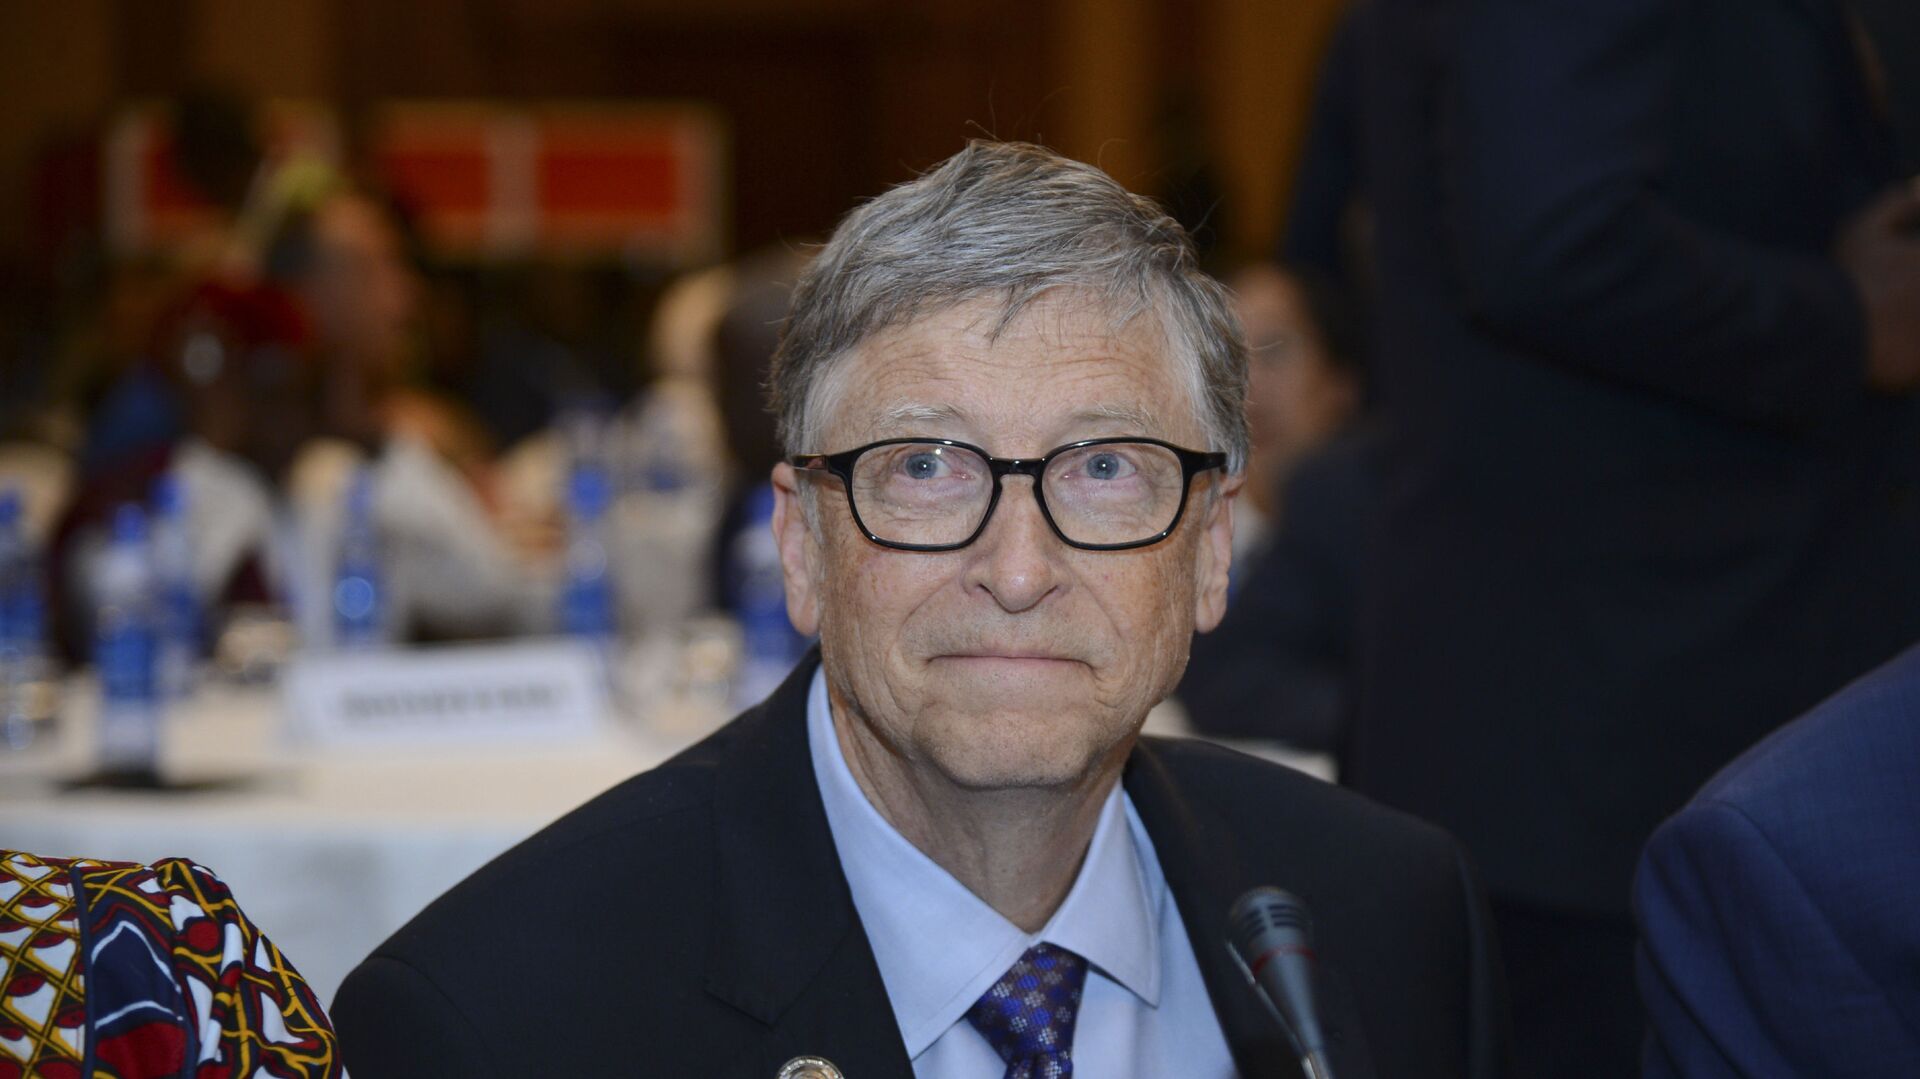 Bill Gates, chairman of the Bill & Melinda Gates Foundation, attends the Africa Leadership Meeting - Investing in Health Outcomes held at a hotel in Addis Ababa, Ethiopia Saturday, Feb. 9, 2019.  - Sputnik International, 1920, 24.03.2021